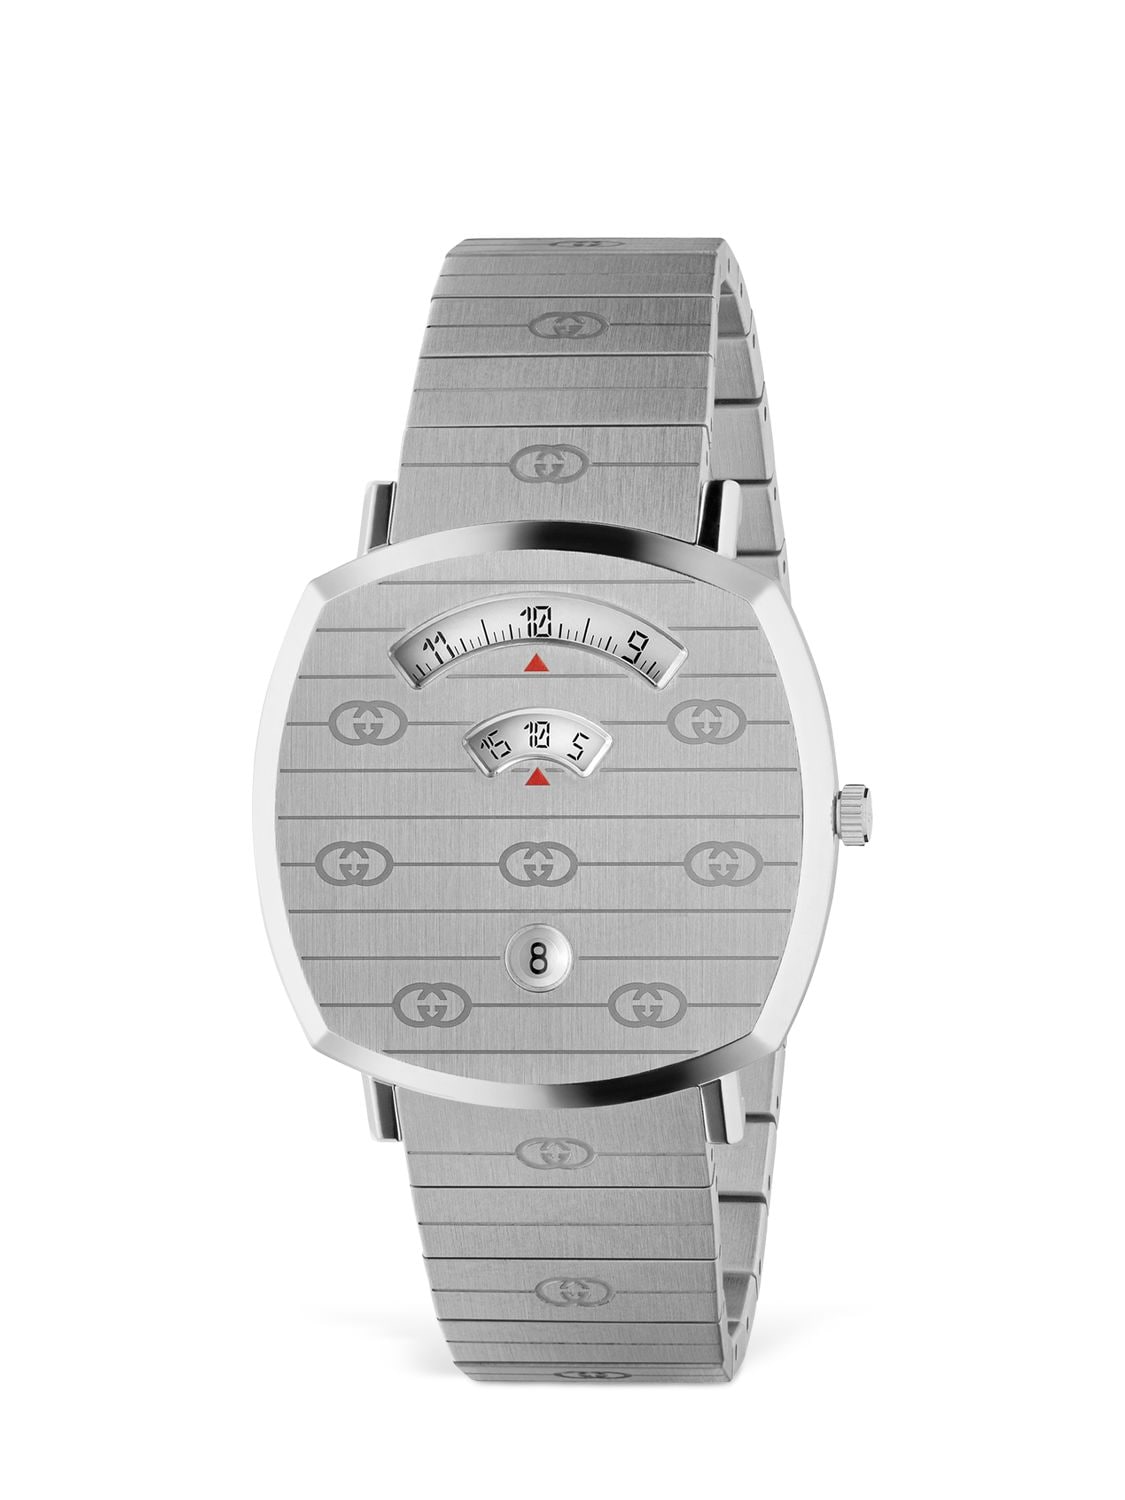 38mm Gucci Grip Silver Colored Watch